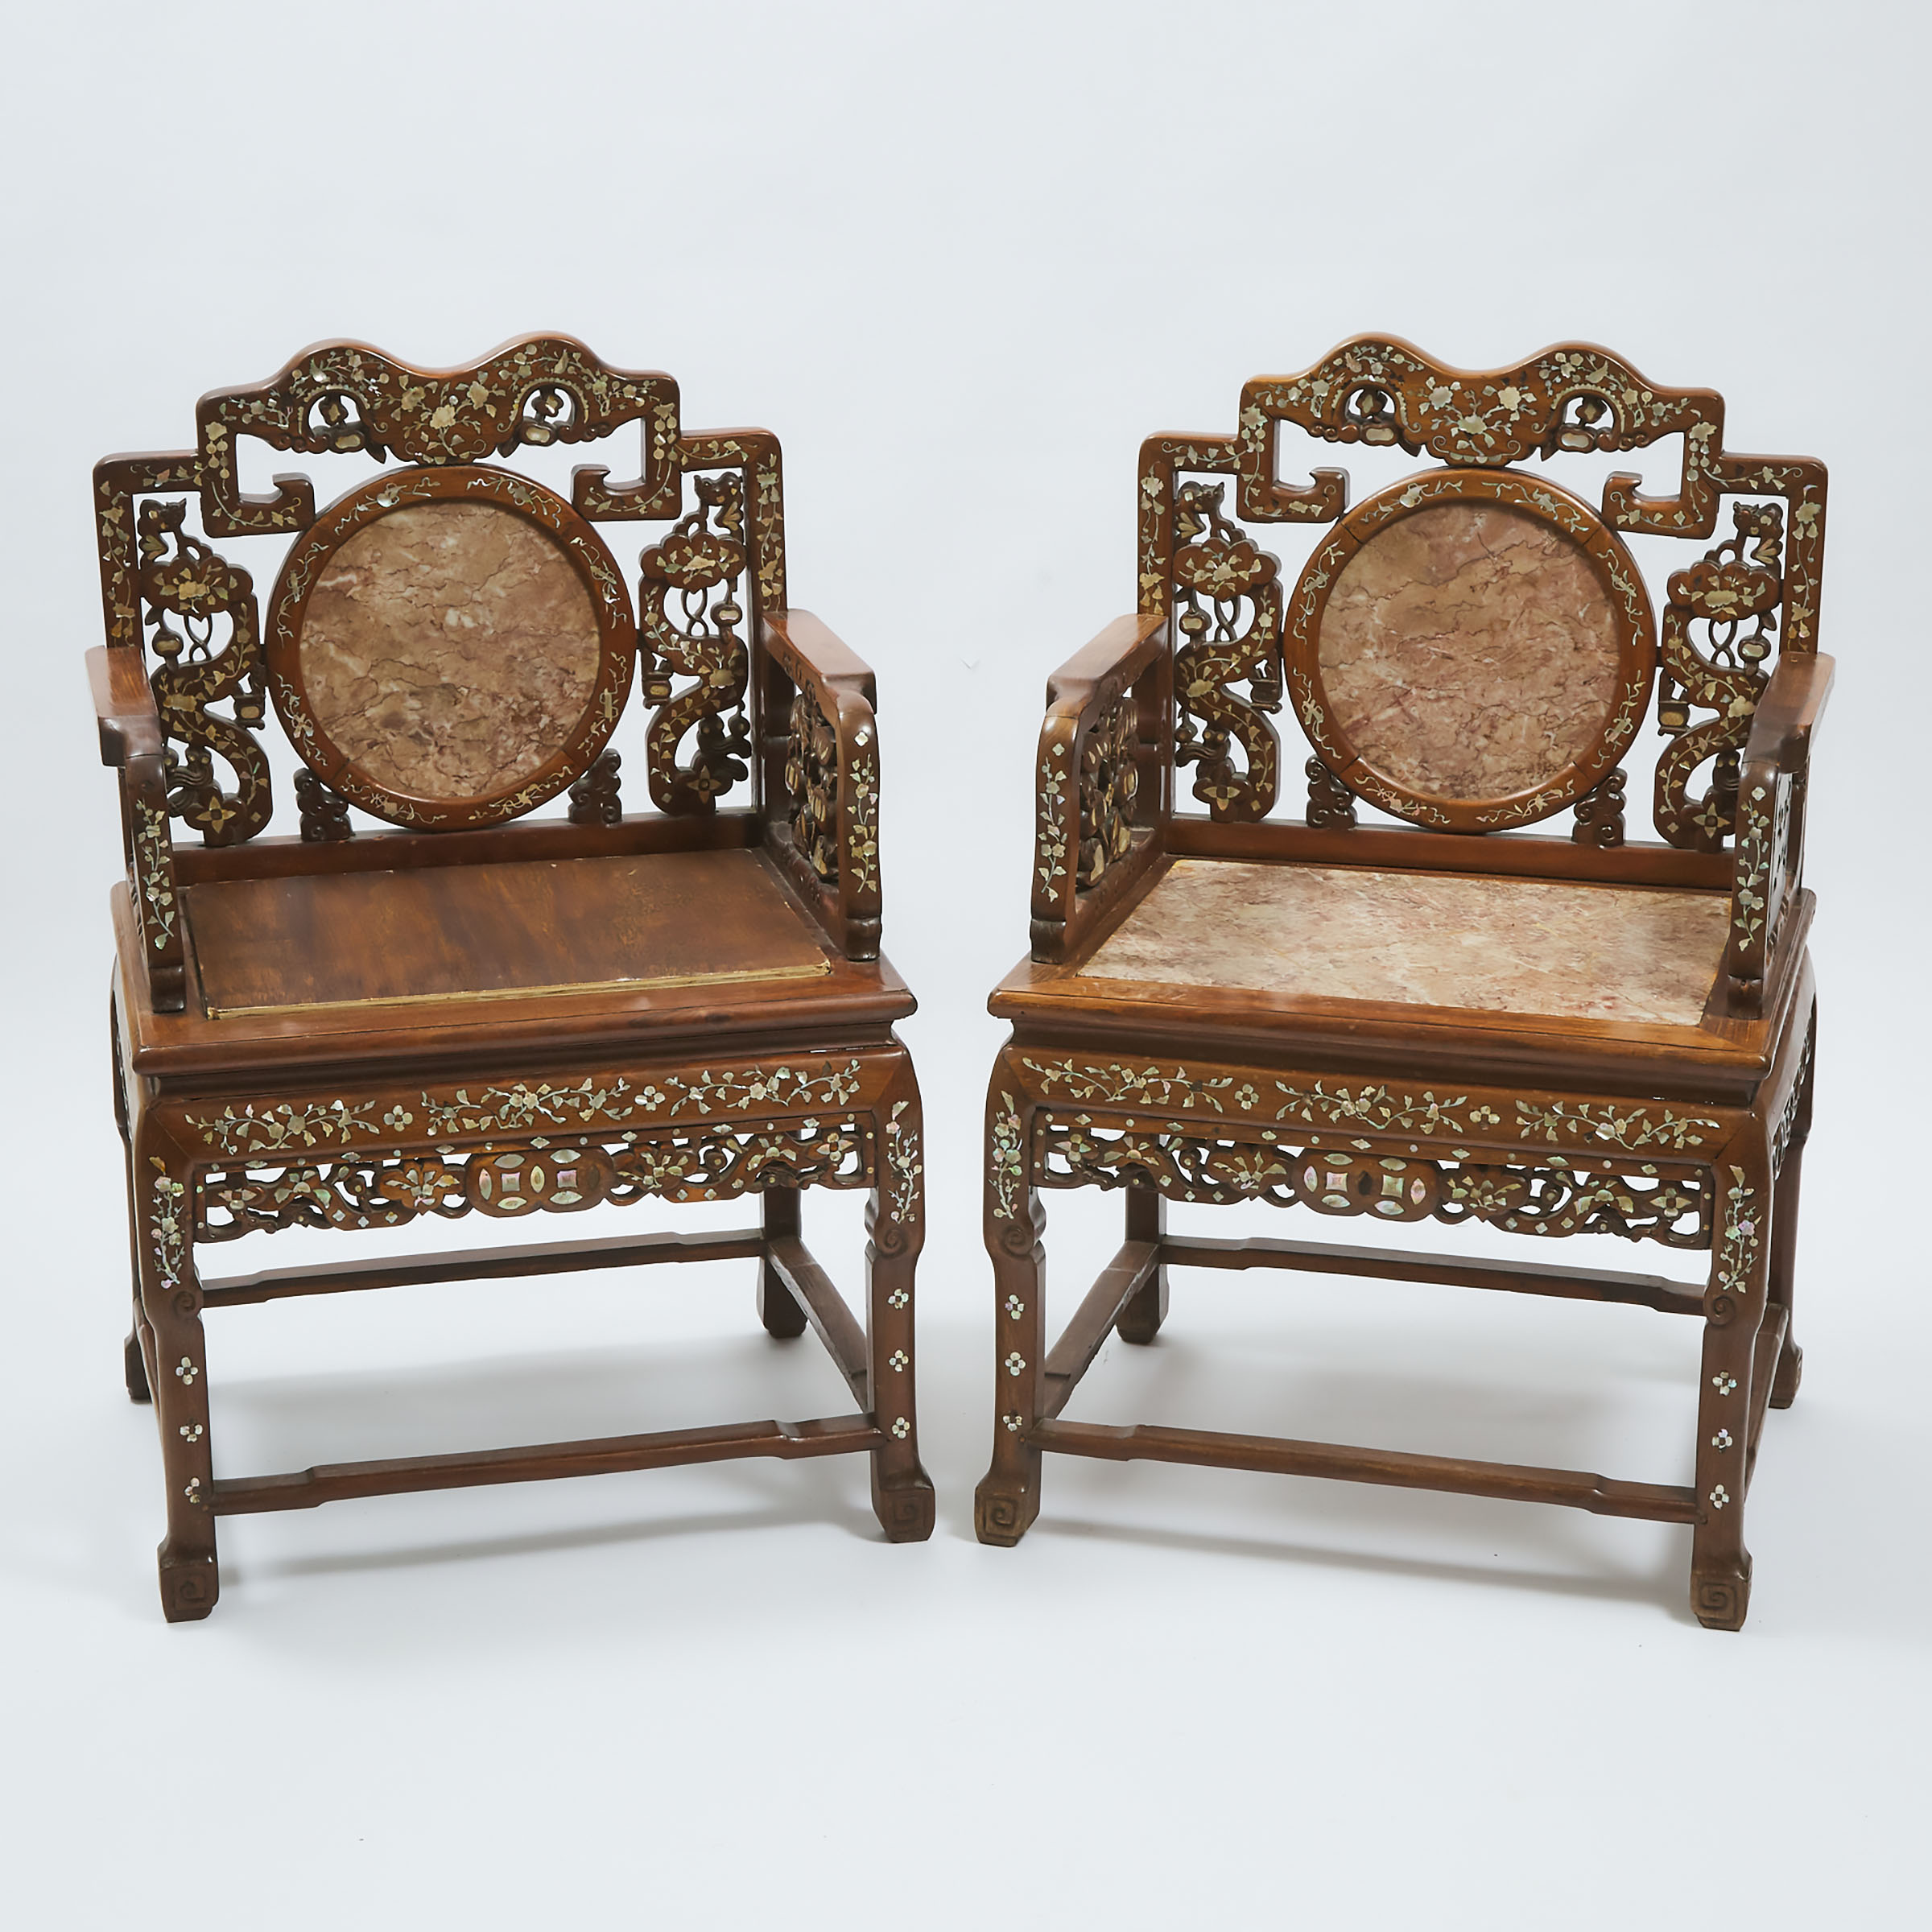 A Pair of Chinese Carved Rosewood Mother-of-Pearl Inlaid and Marble Inset Chairs, 19th Century